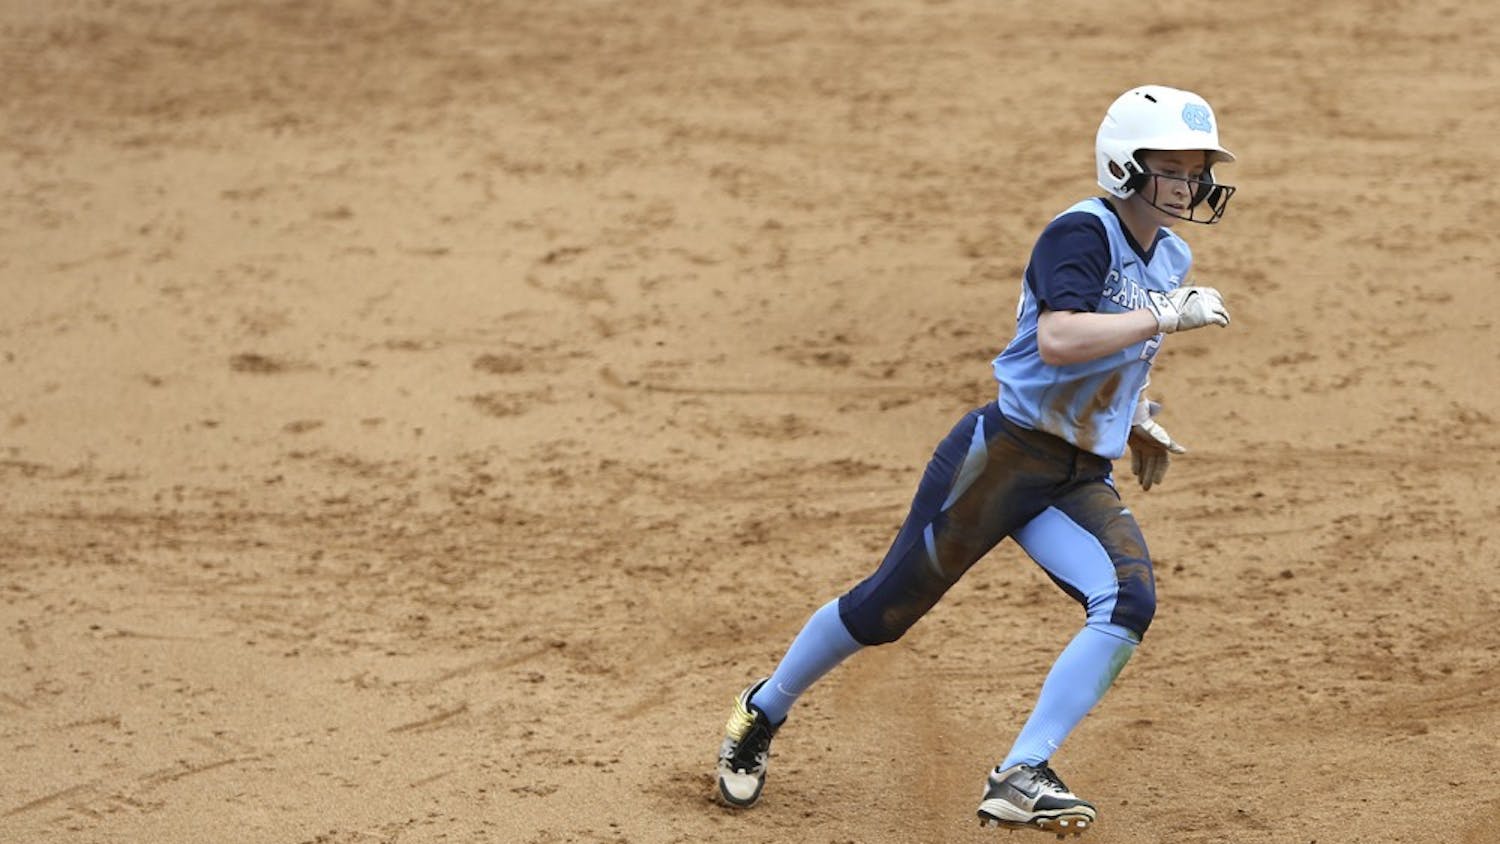 UNC's softball team took on FSU Saturday afternoon to start a double header at Anderson Softball Stadium.